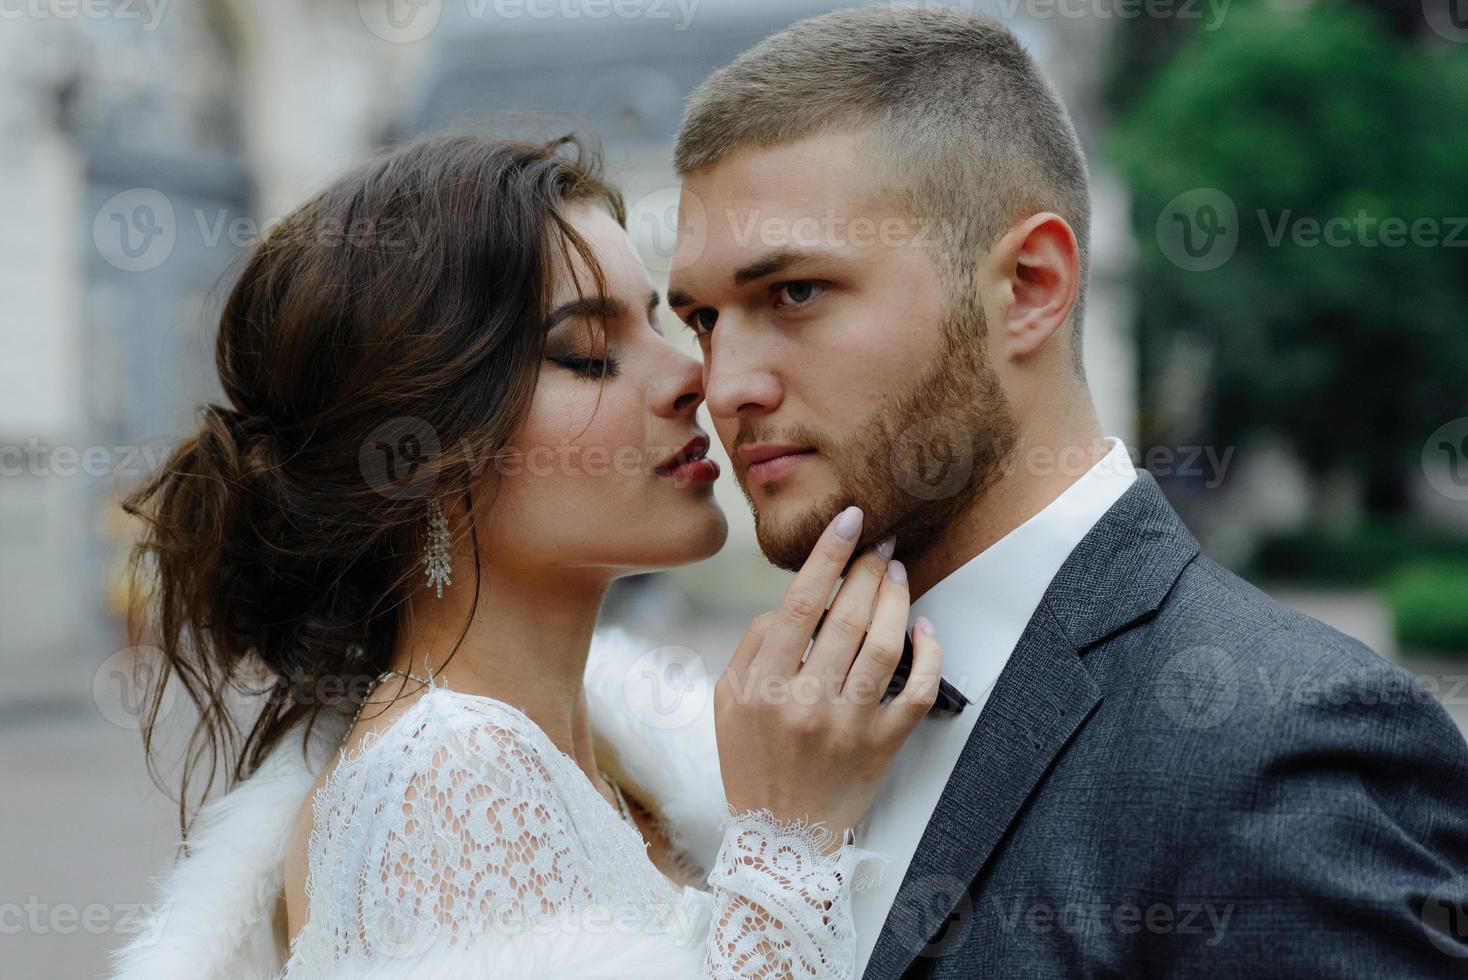 the groom in a gray suit and the bride in a gray dress look at each other, closeup portrait photo